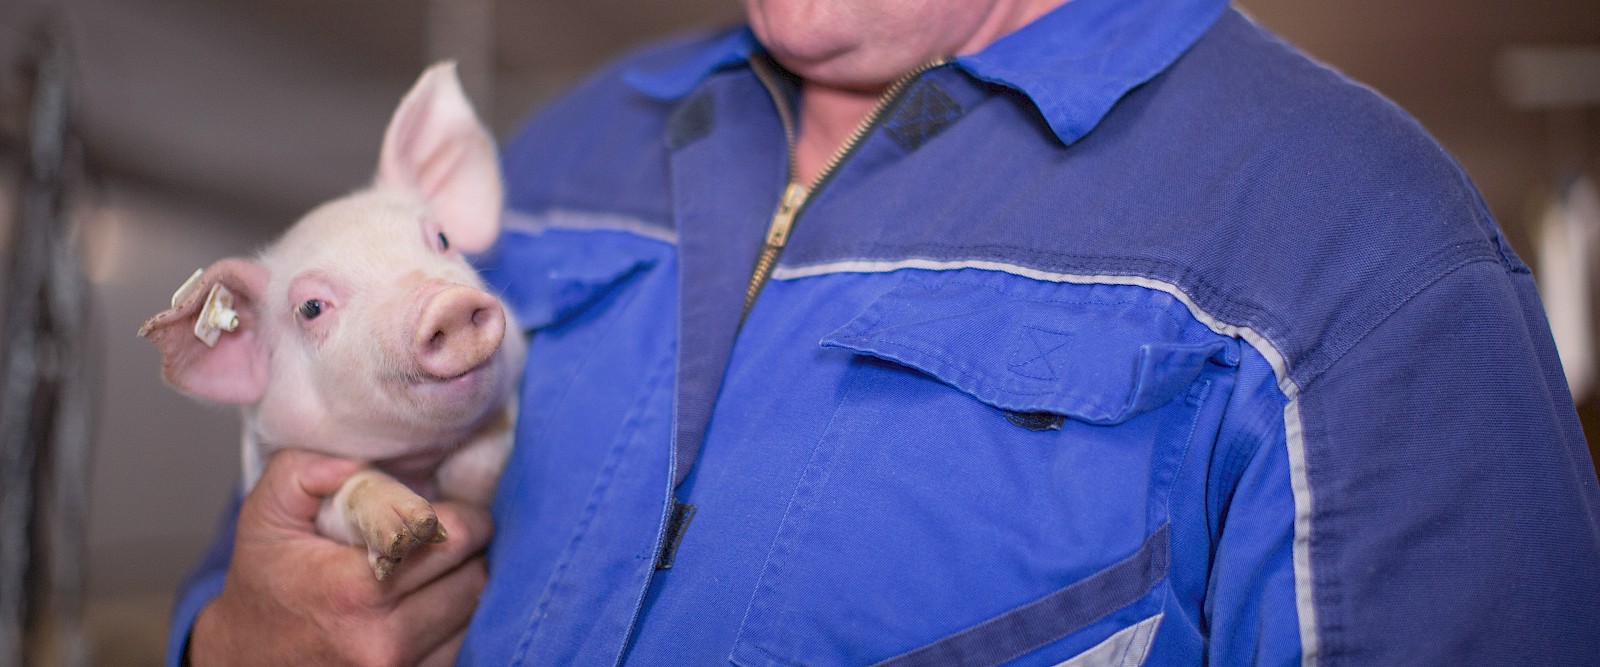 deuka pig consultant holds healthy and vital piglets in the barn (© Deutsche Tiernahrung Cremer).